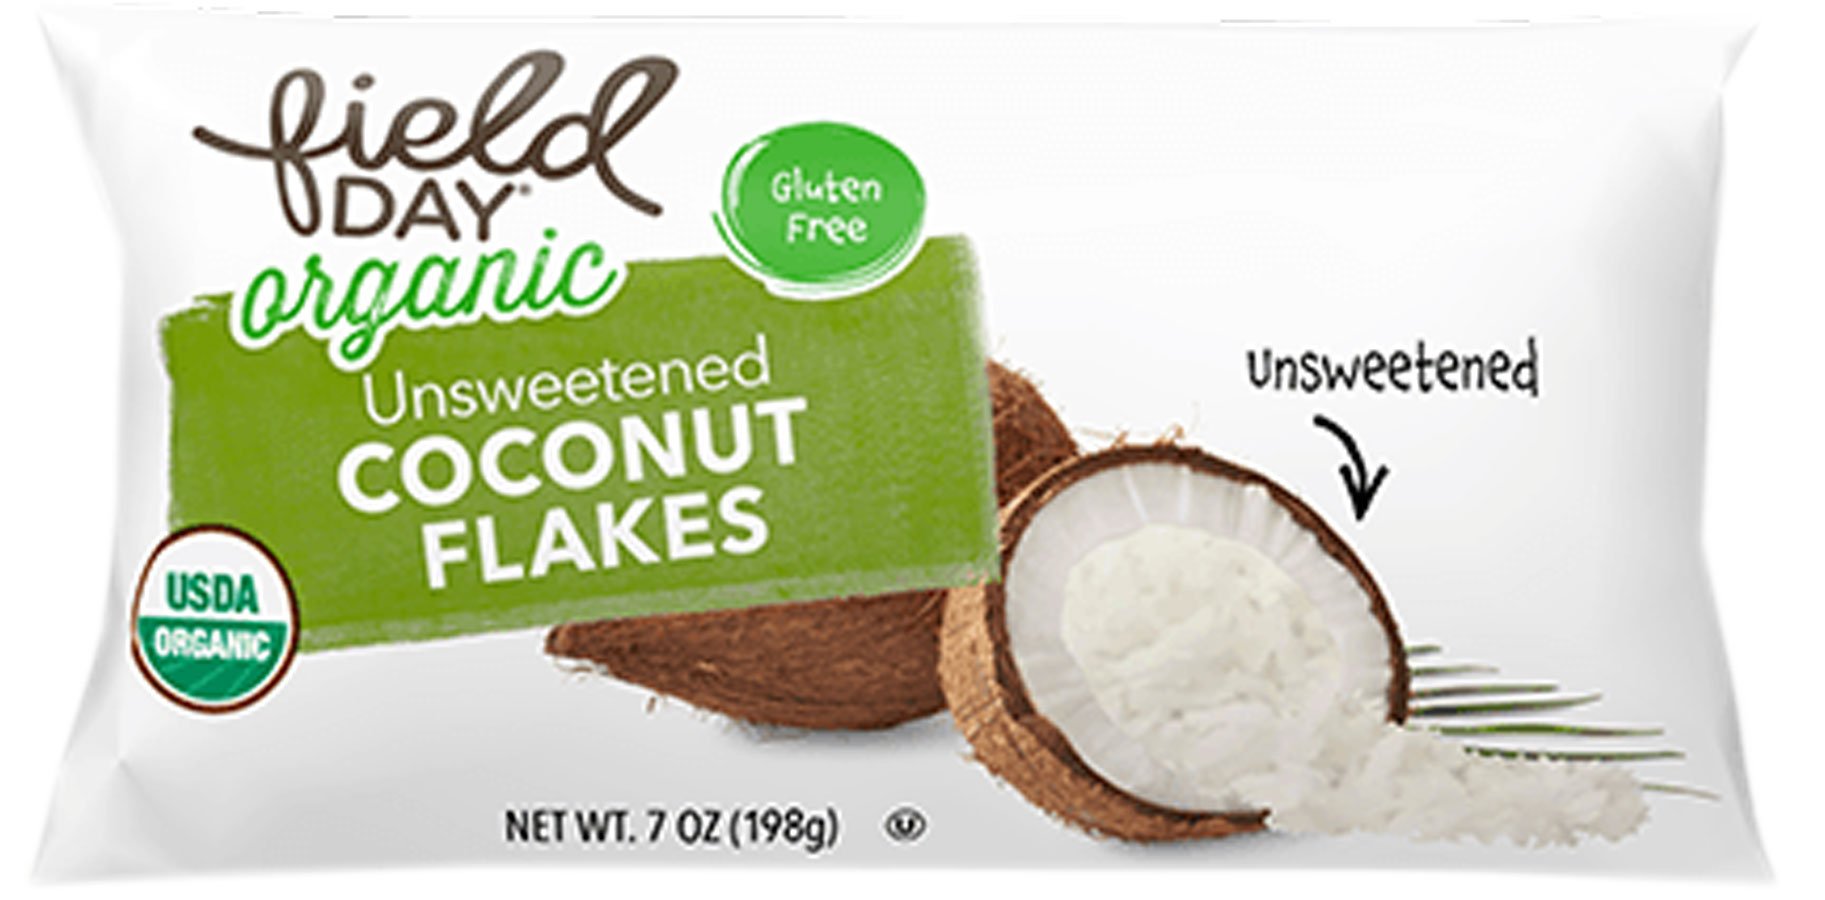 Field Day Organic Unsweetened Coconut Flakes Shop At H E B